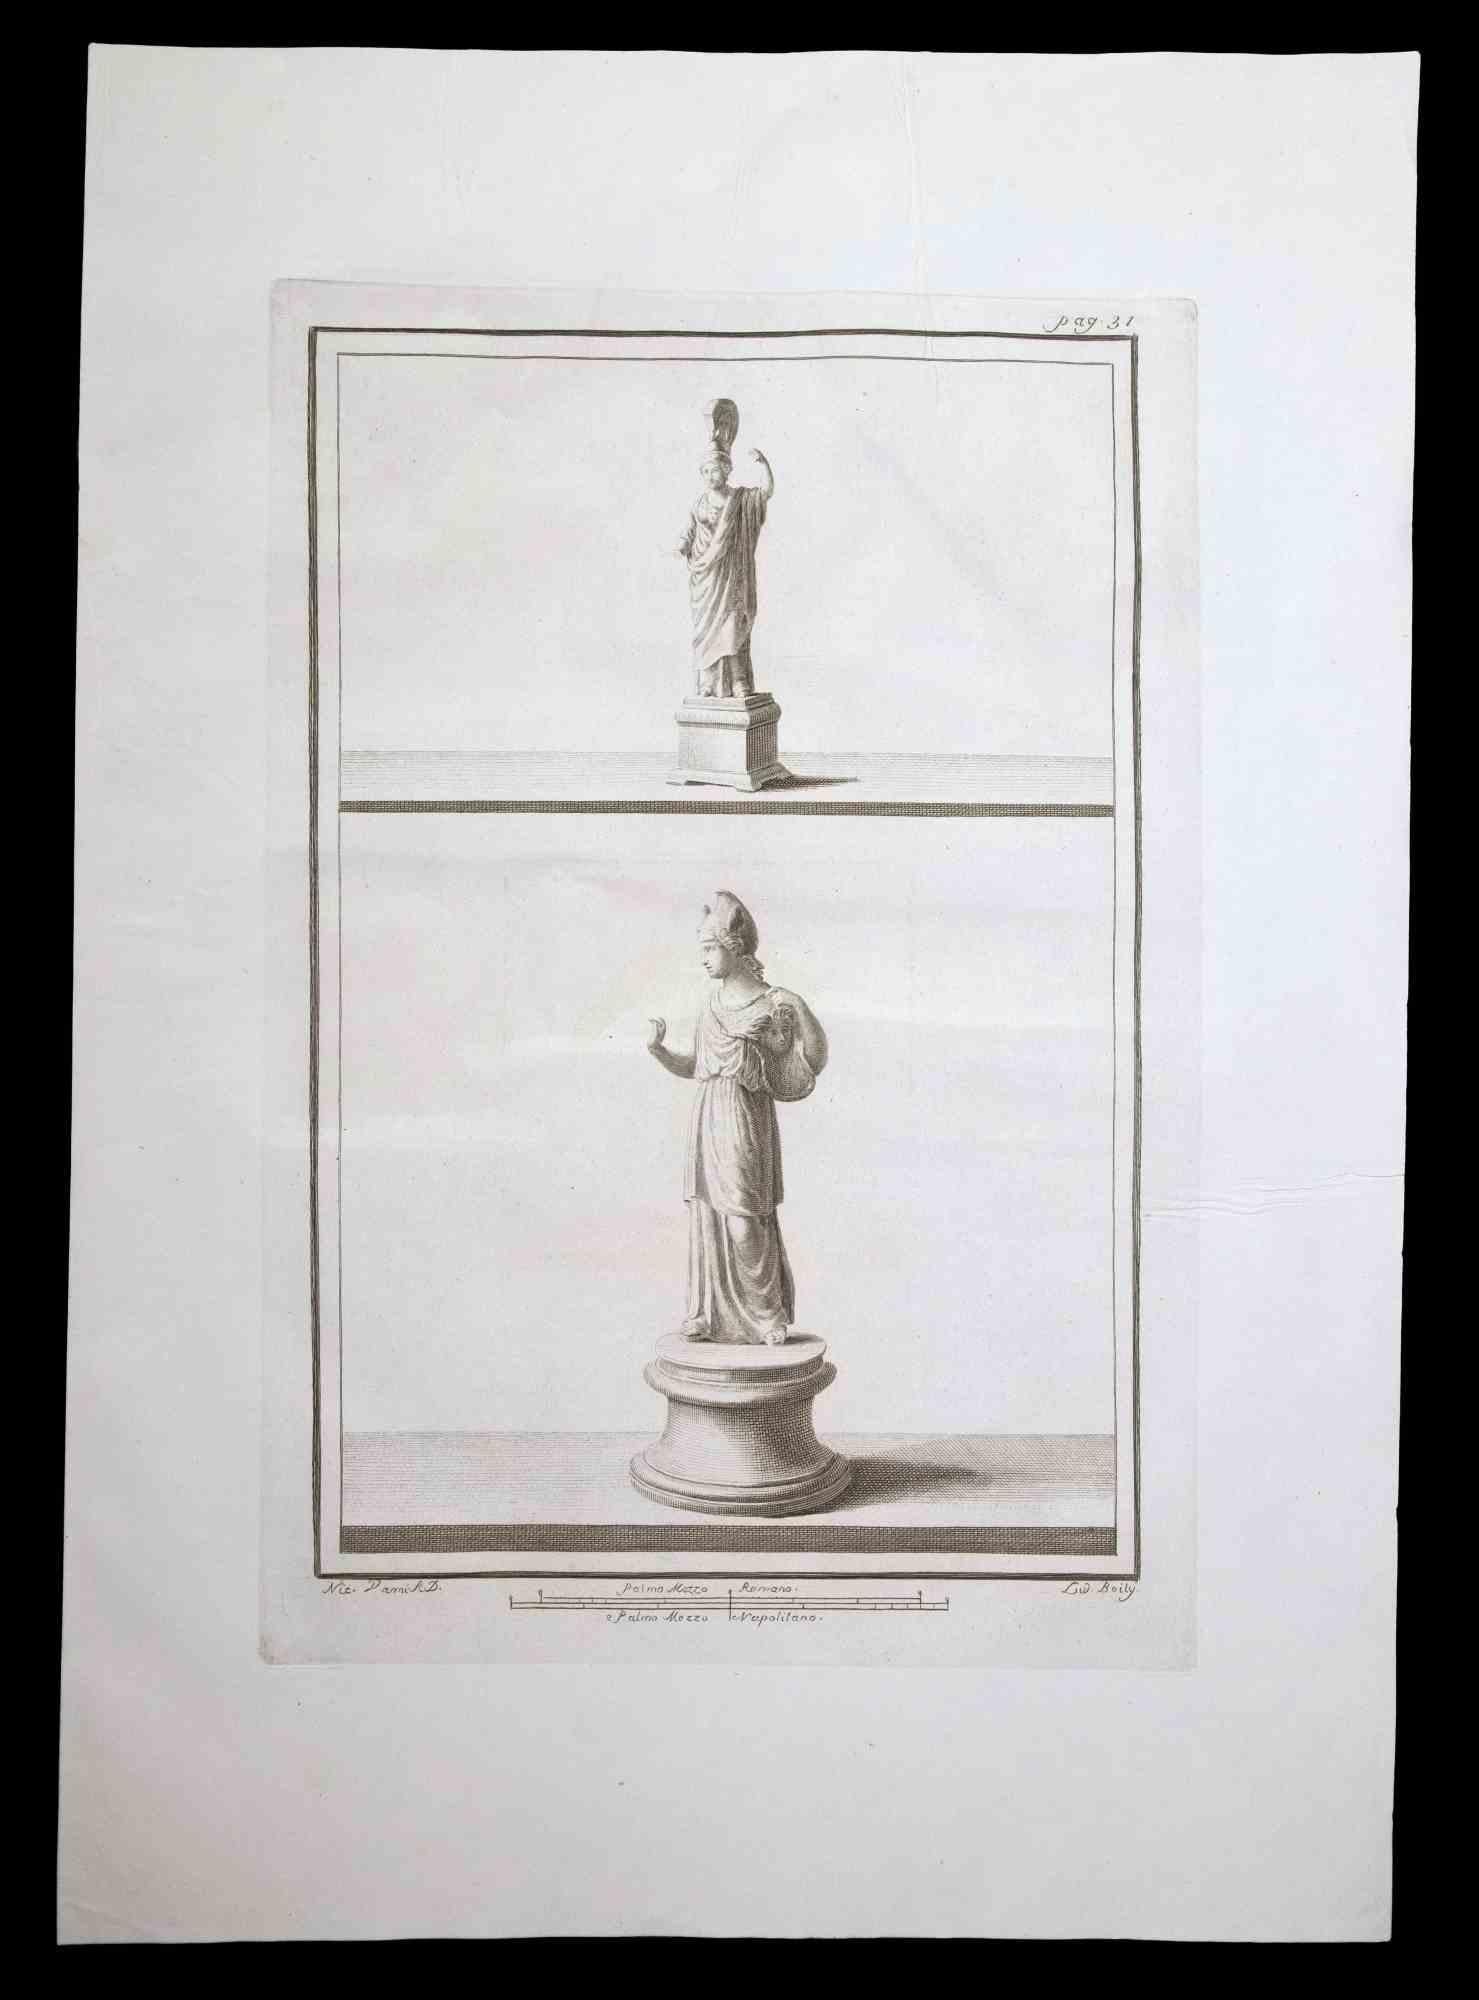 Ludovico Boily Figurative Print - Athena Goddess, Ancient Roman Statue - Etching on Paper - 18th Century